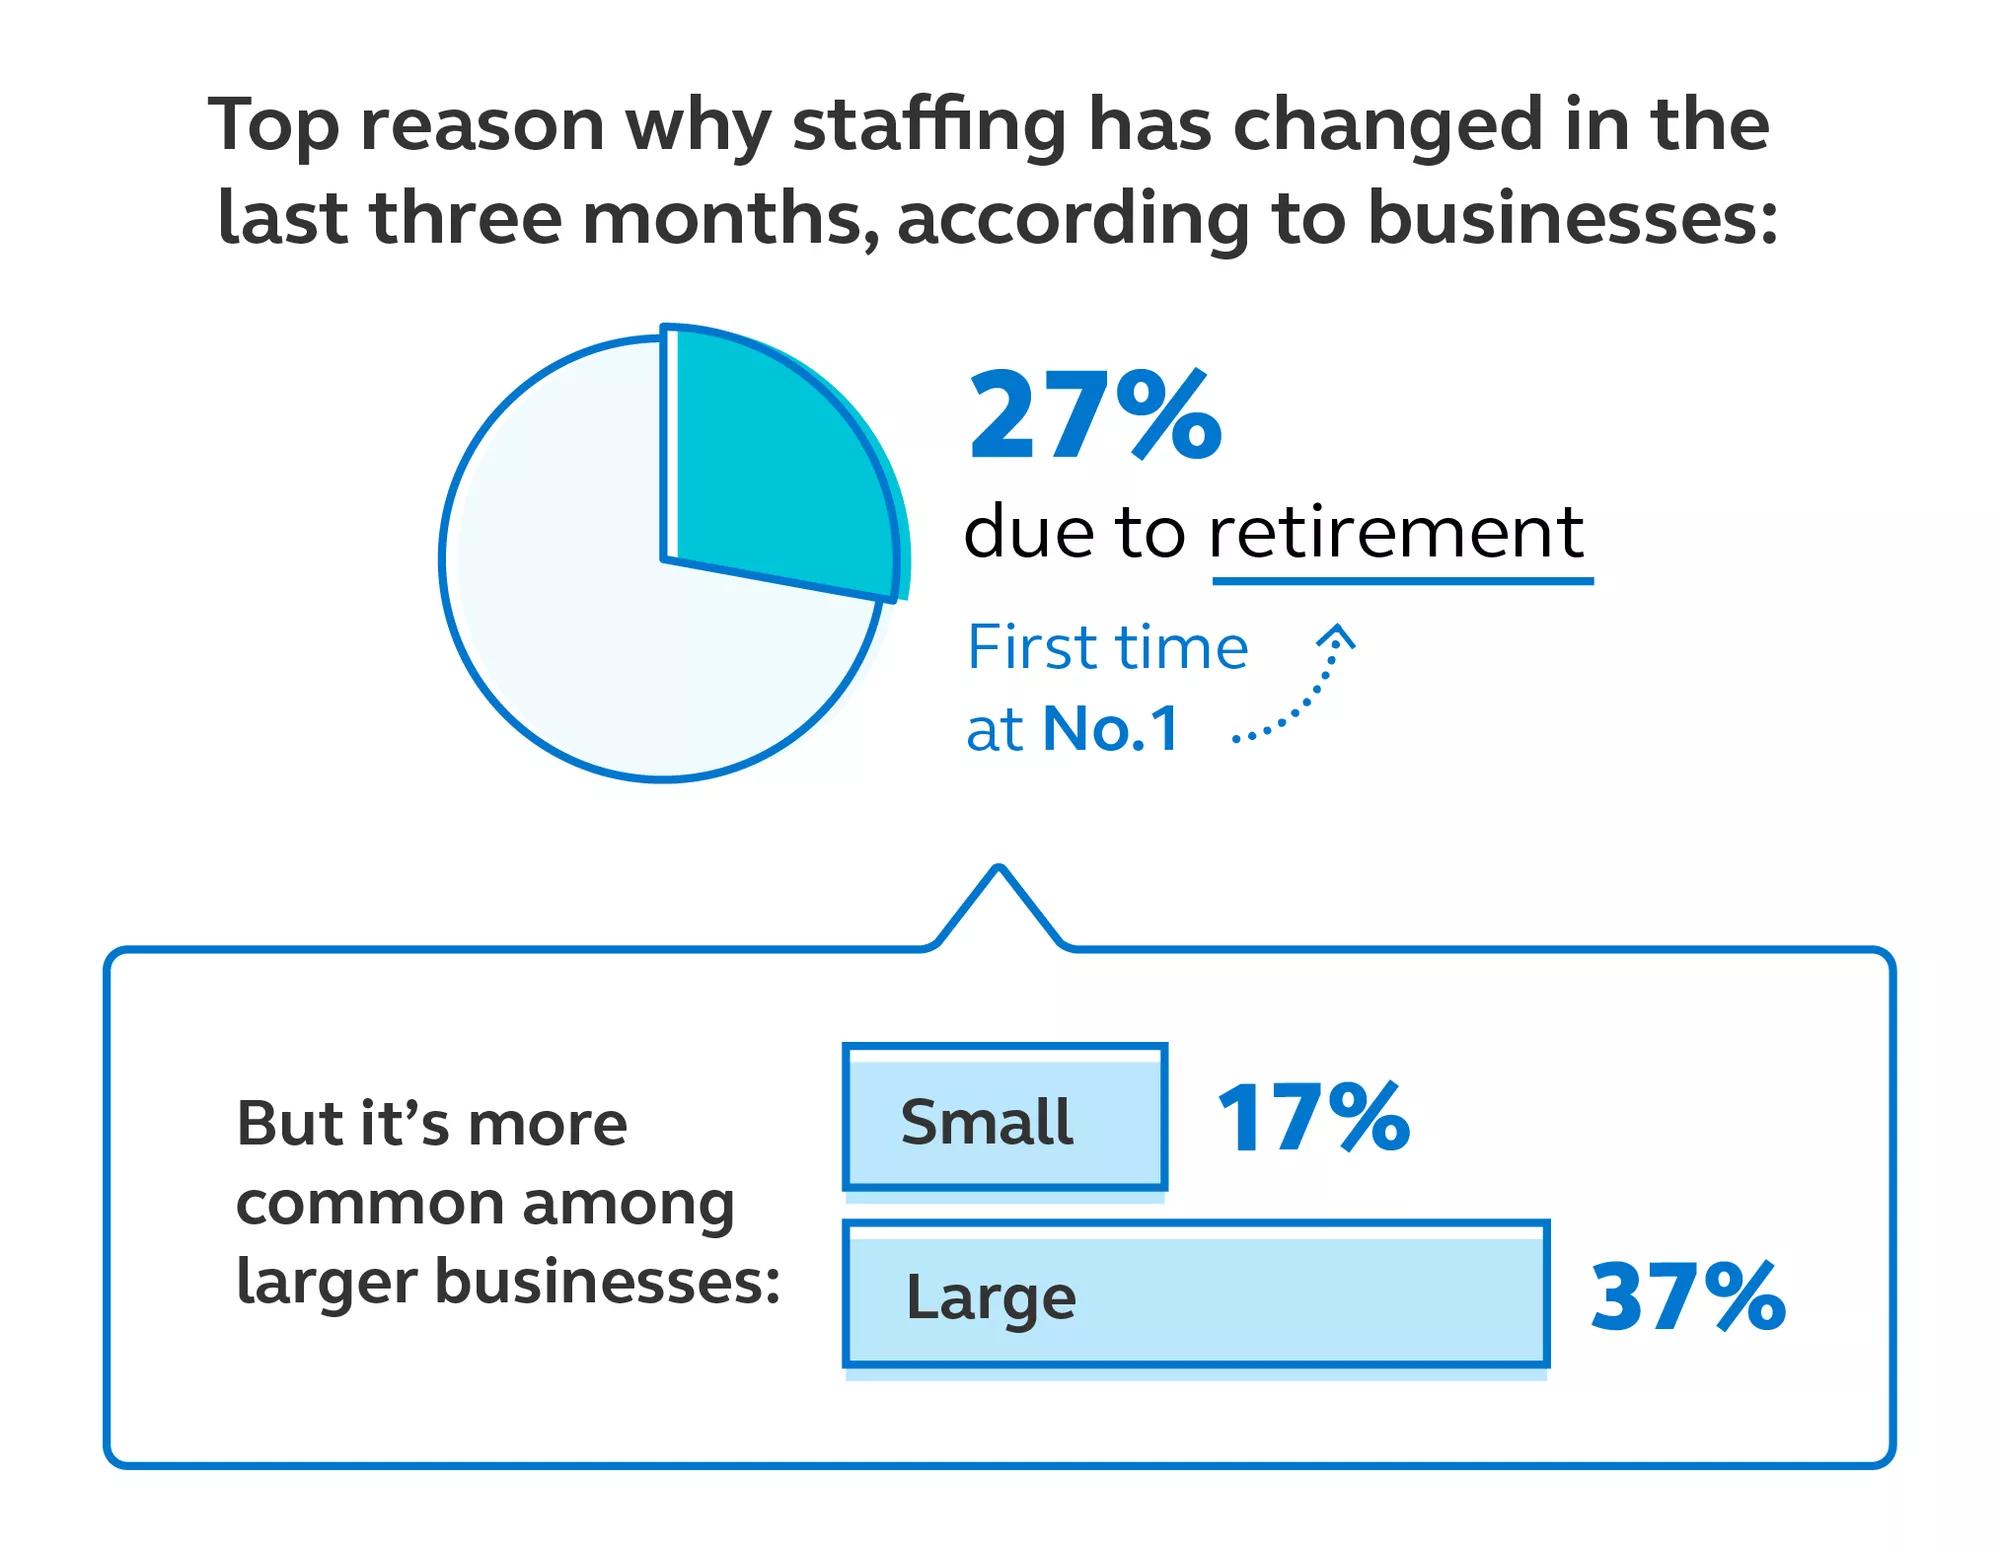 Top reasons staffing changed in the last 3 months. 27% due to retirement.  More common among larger businesses